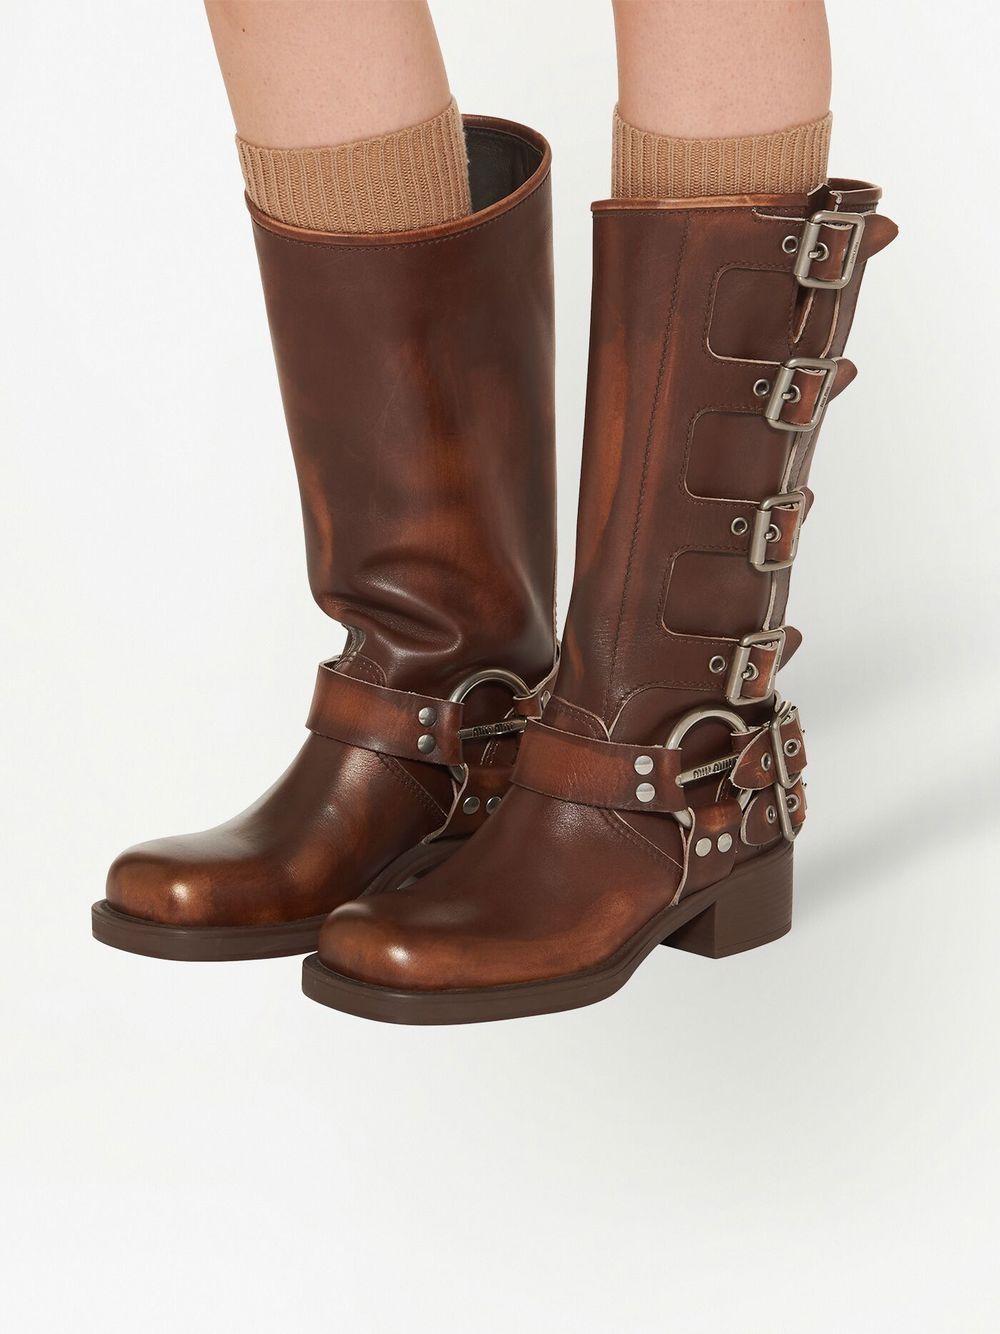 Porto bacon Læs Miu Miu Buckled Leather Biker Boots in Brown | Lyst